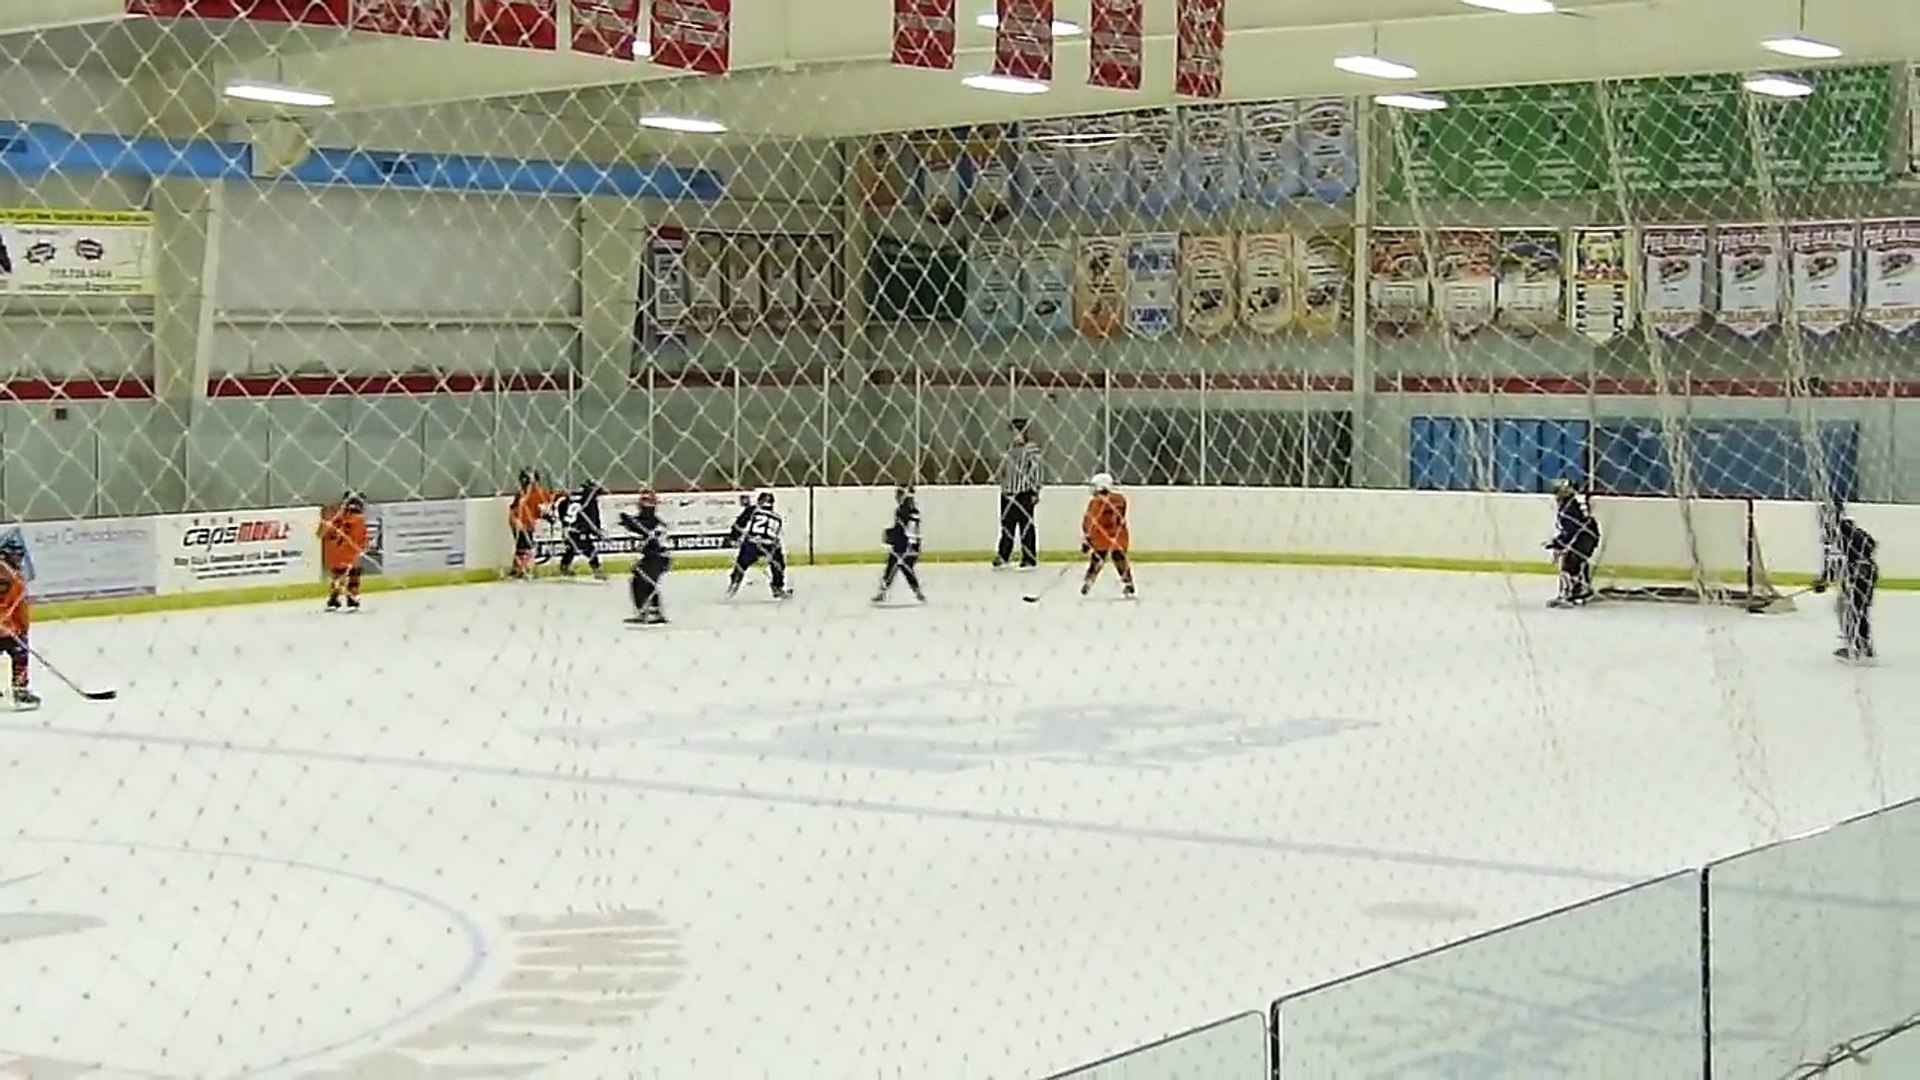 Kids Ice Hockey Game - end of game